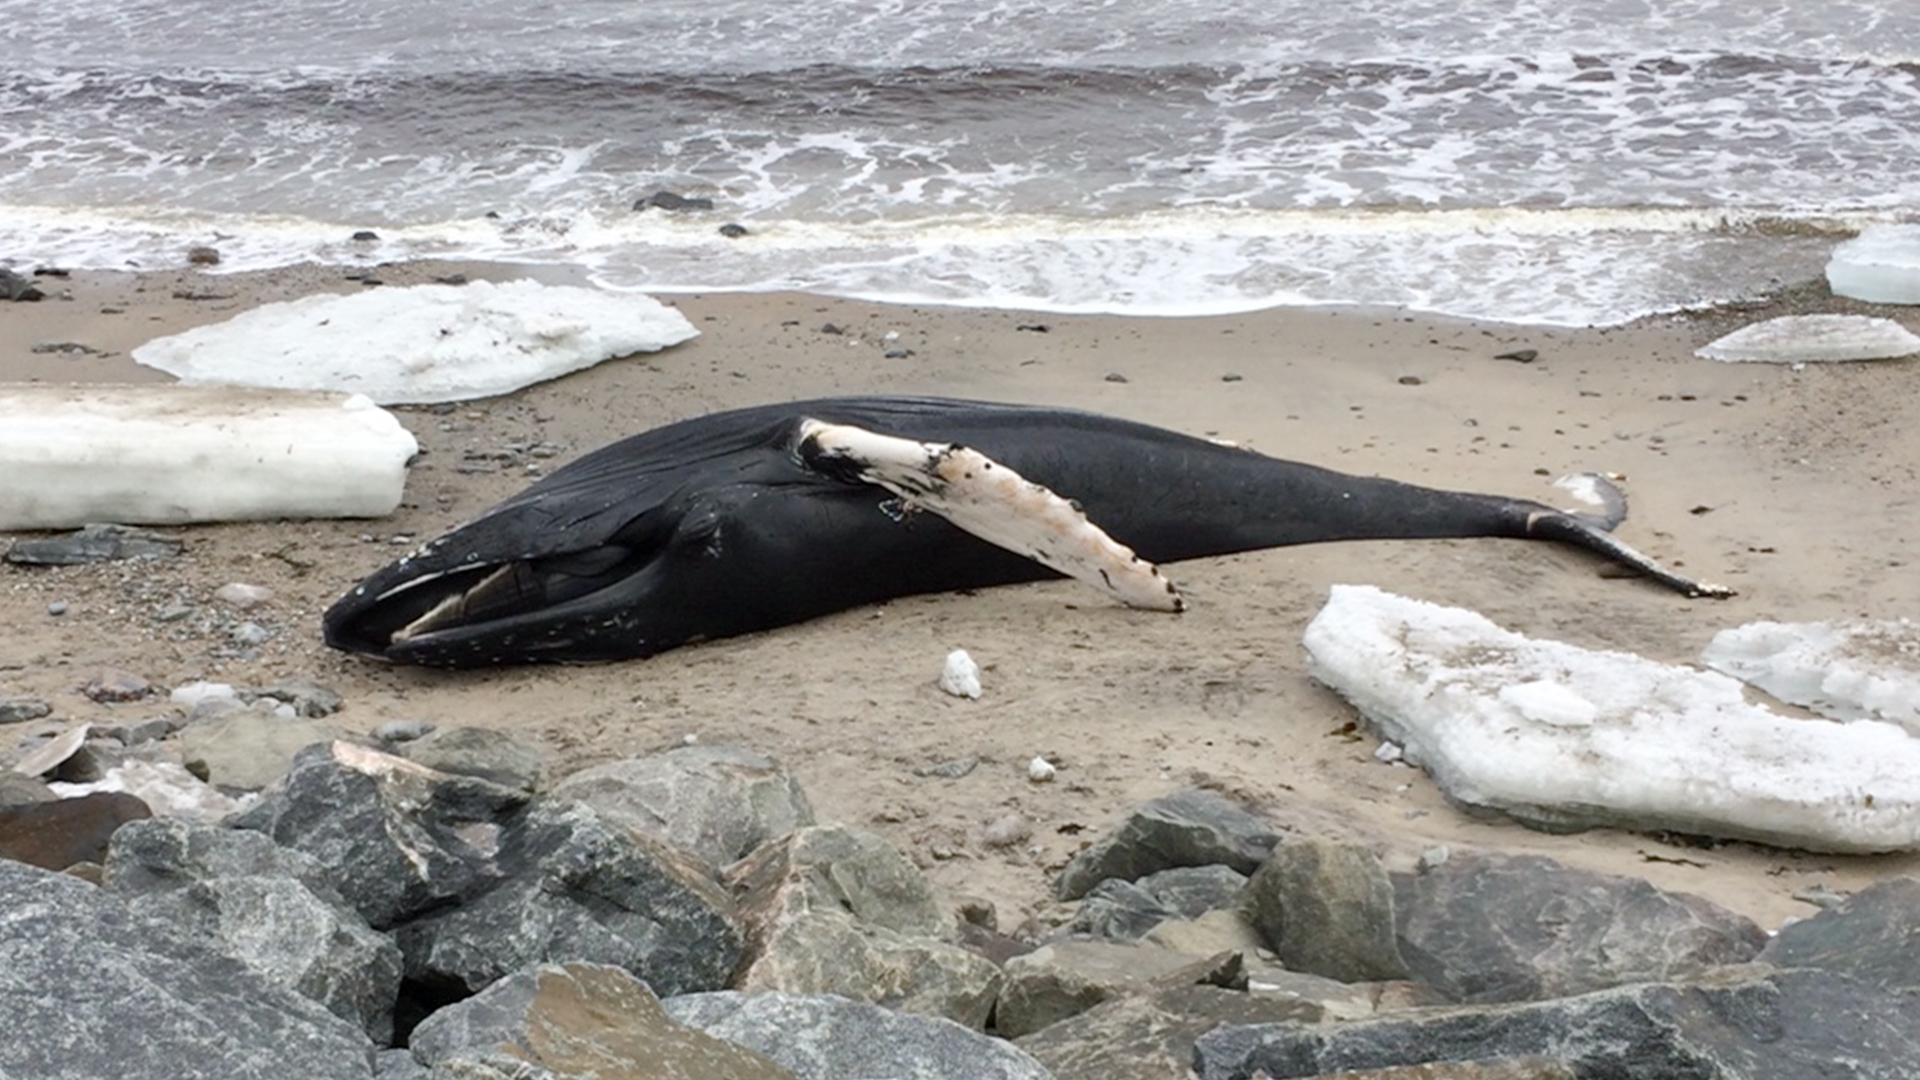 A humpback whale carcass is stranded on a thin strip of beach amidst a few chunks of ice.